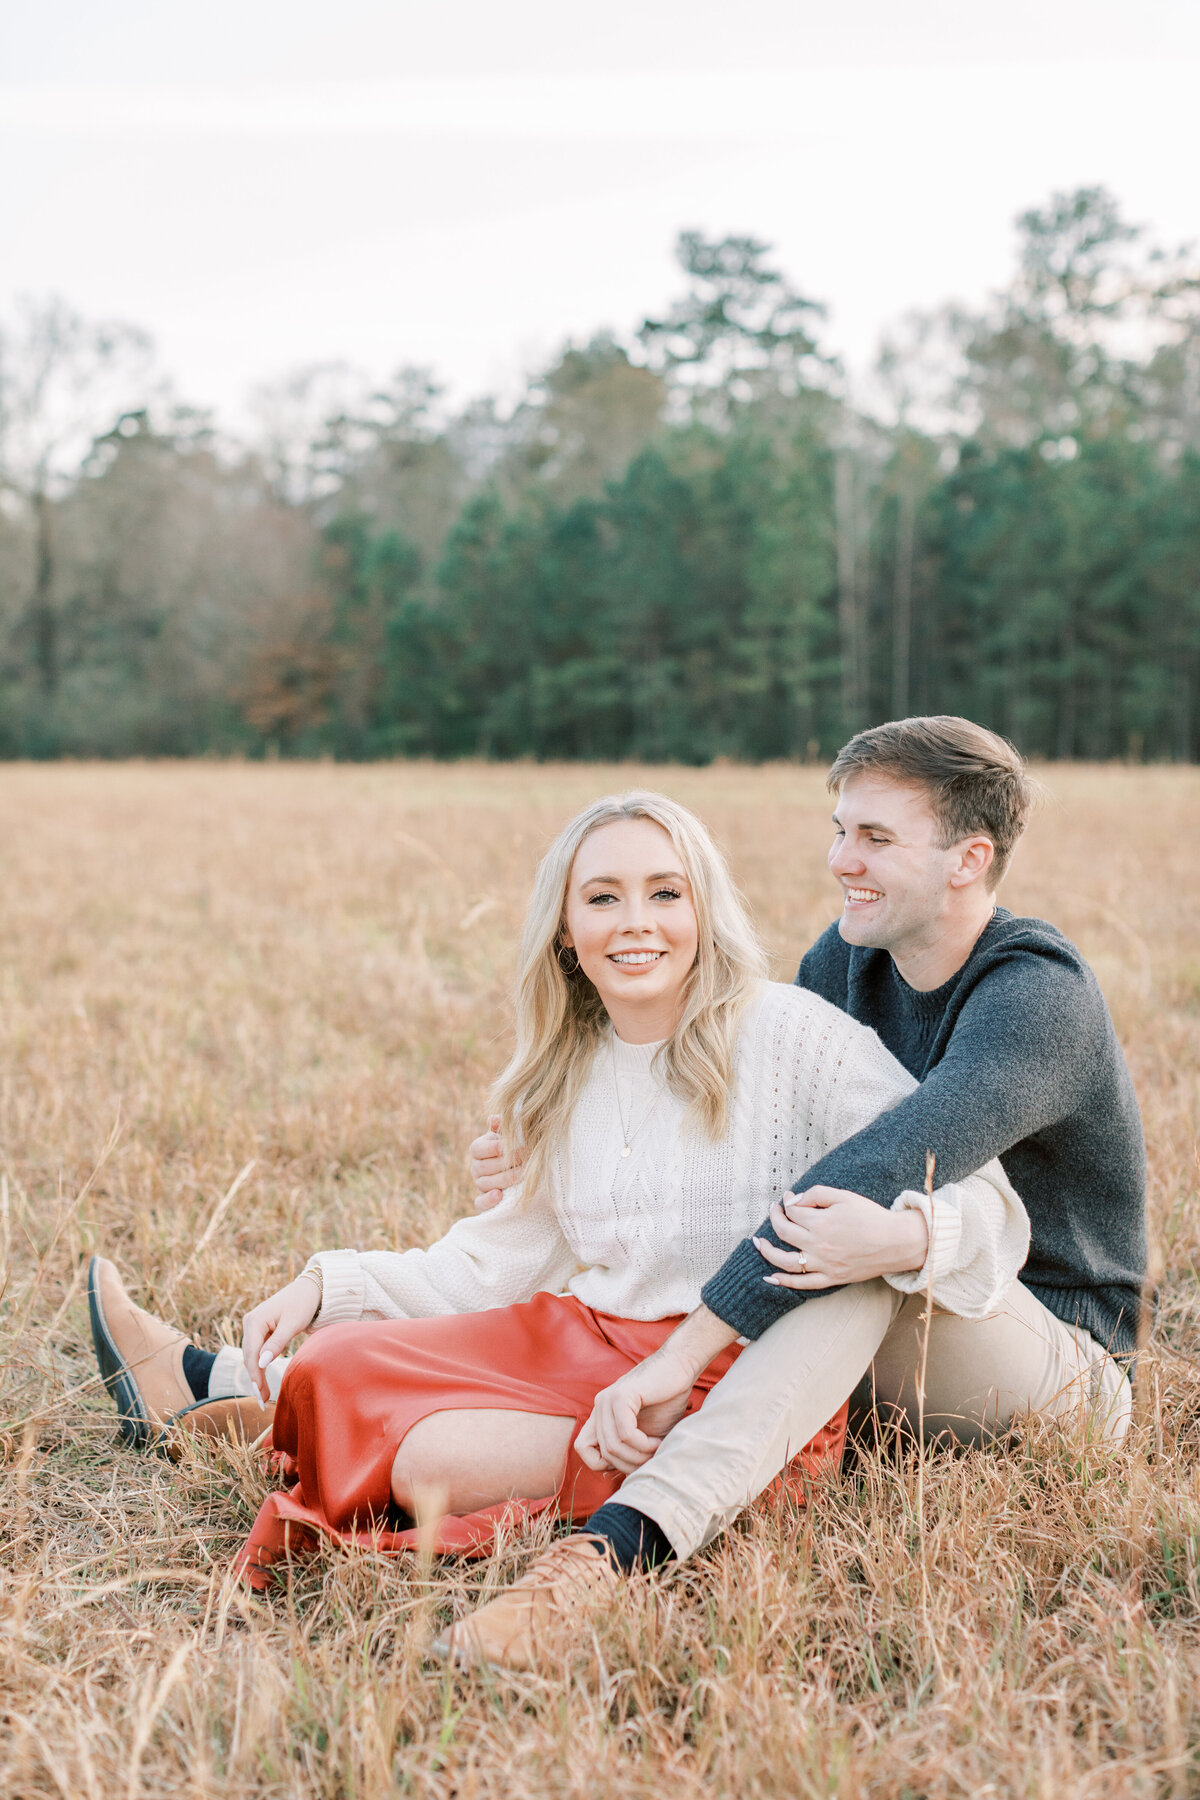 A couple laughs while sitting down in a field.